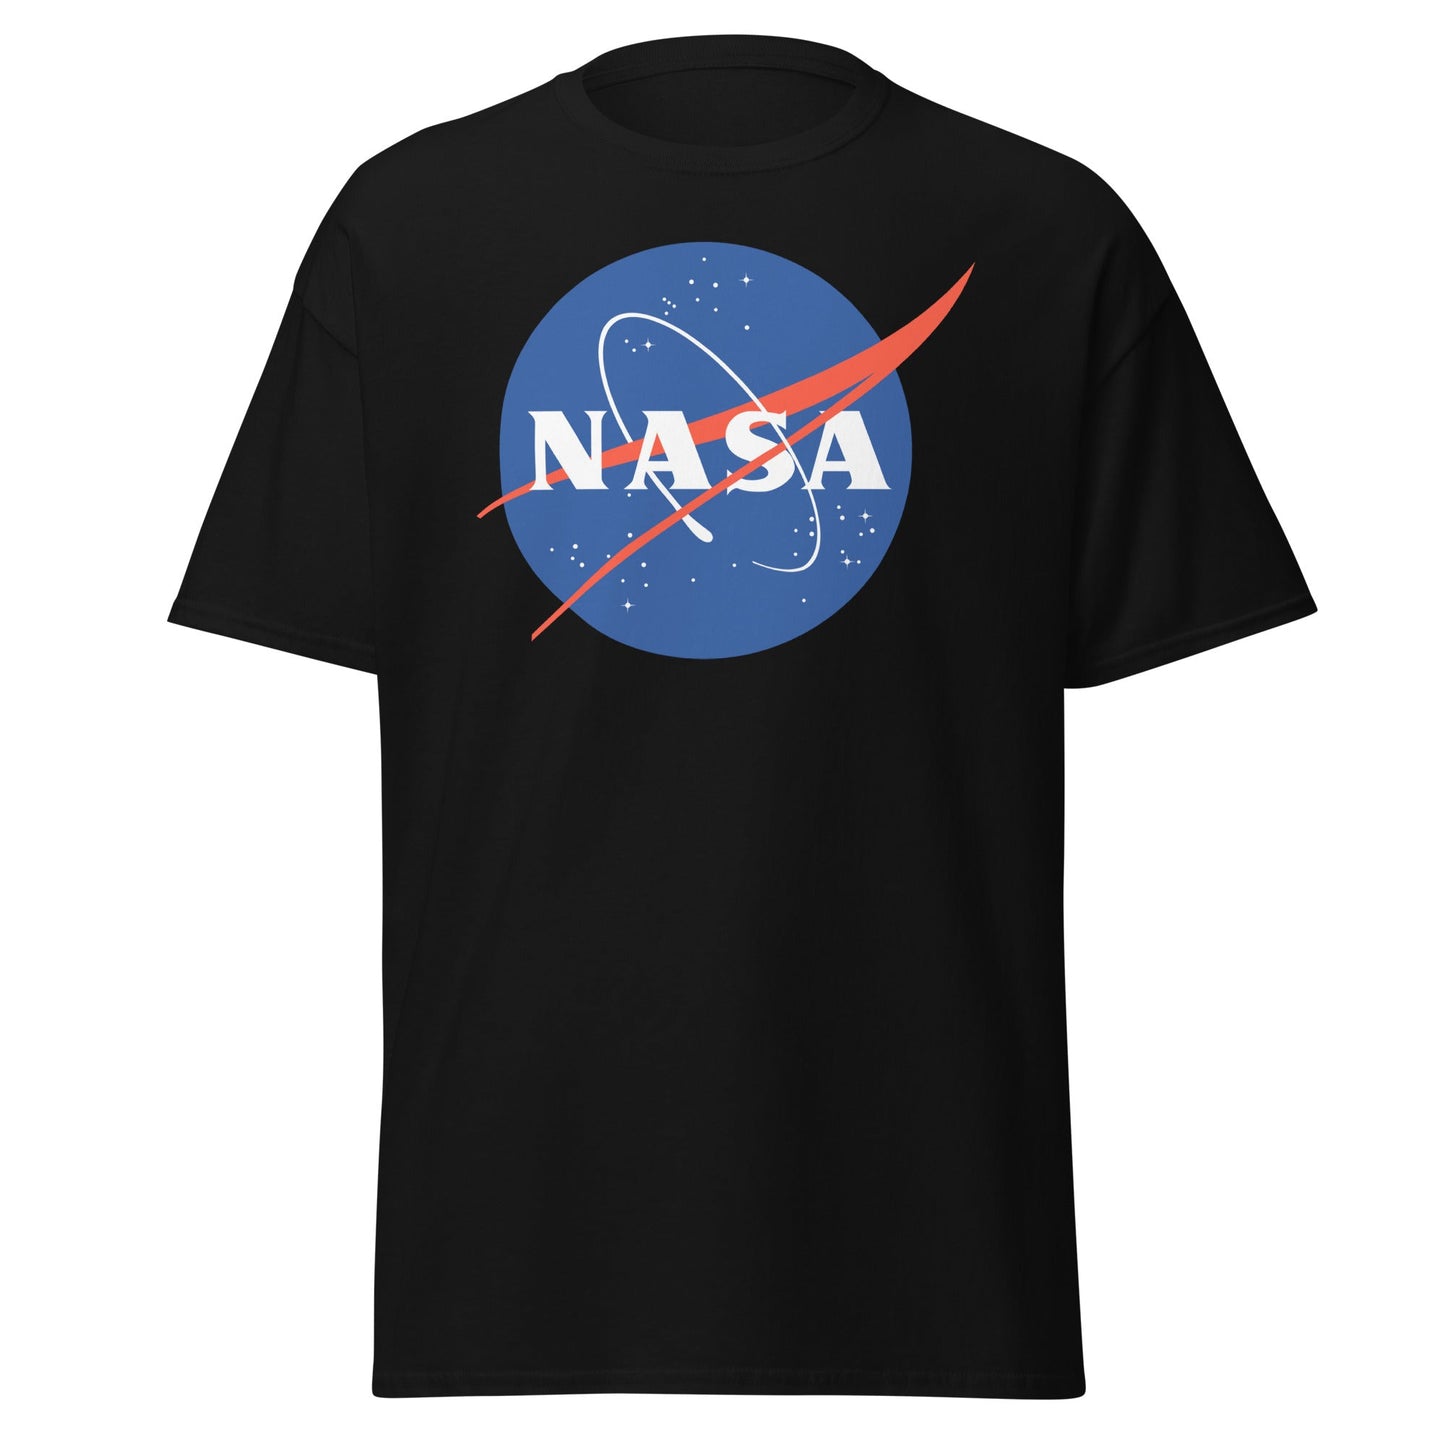 NASA Meatball Logo Men's T-Shirt: Official Space Agency Graphic Tee for Science Enthusiasts